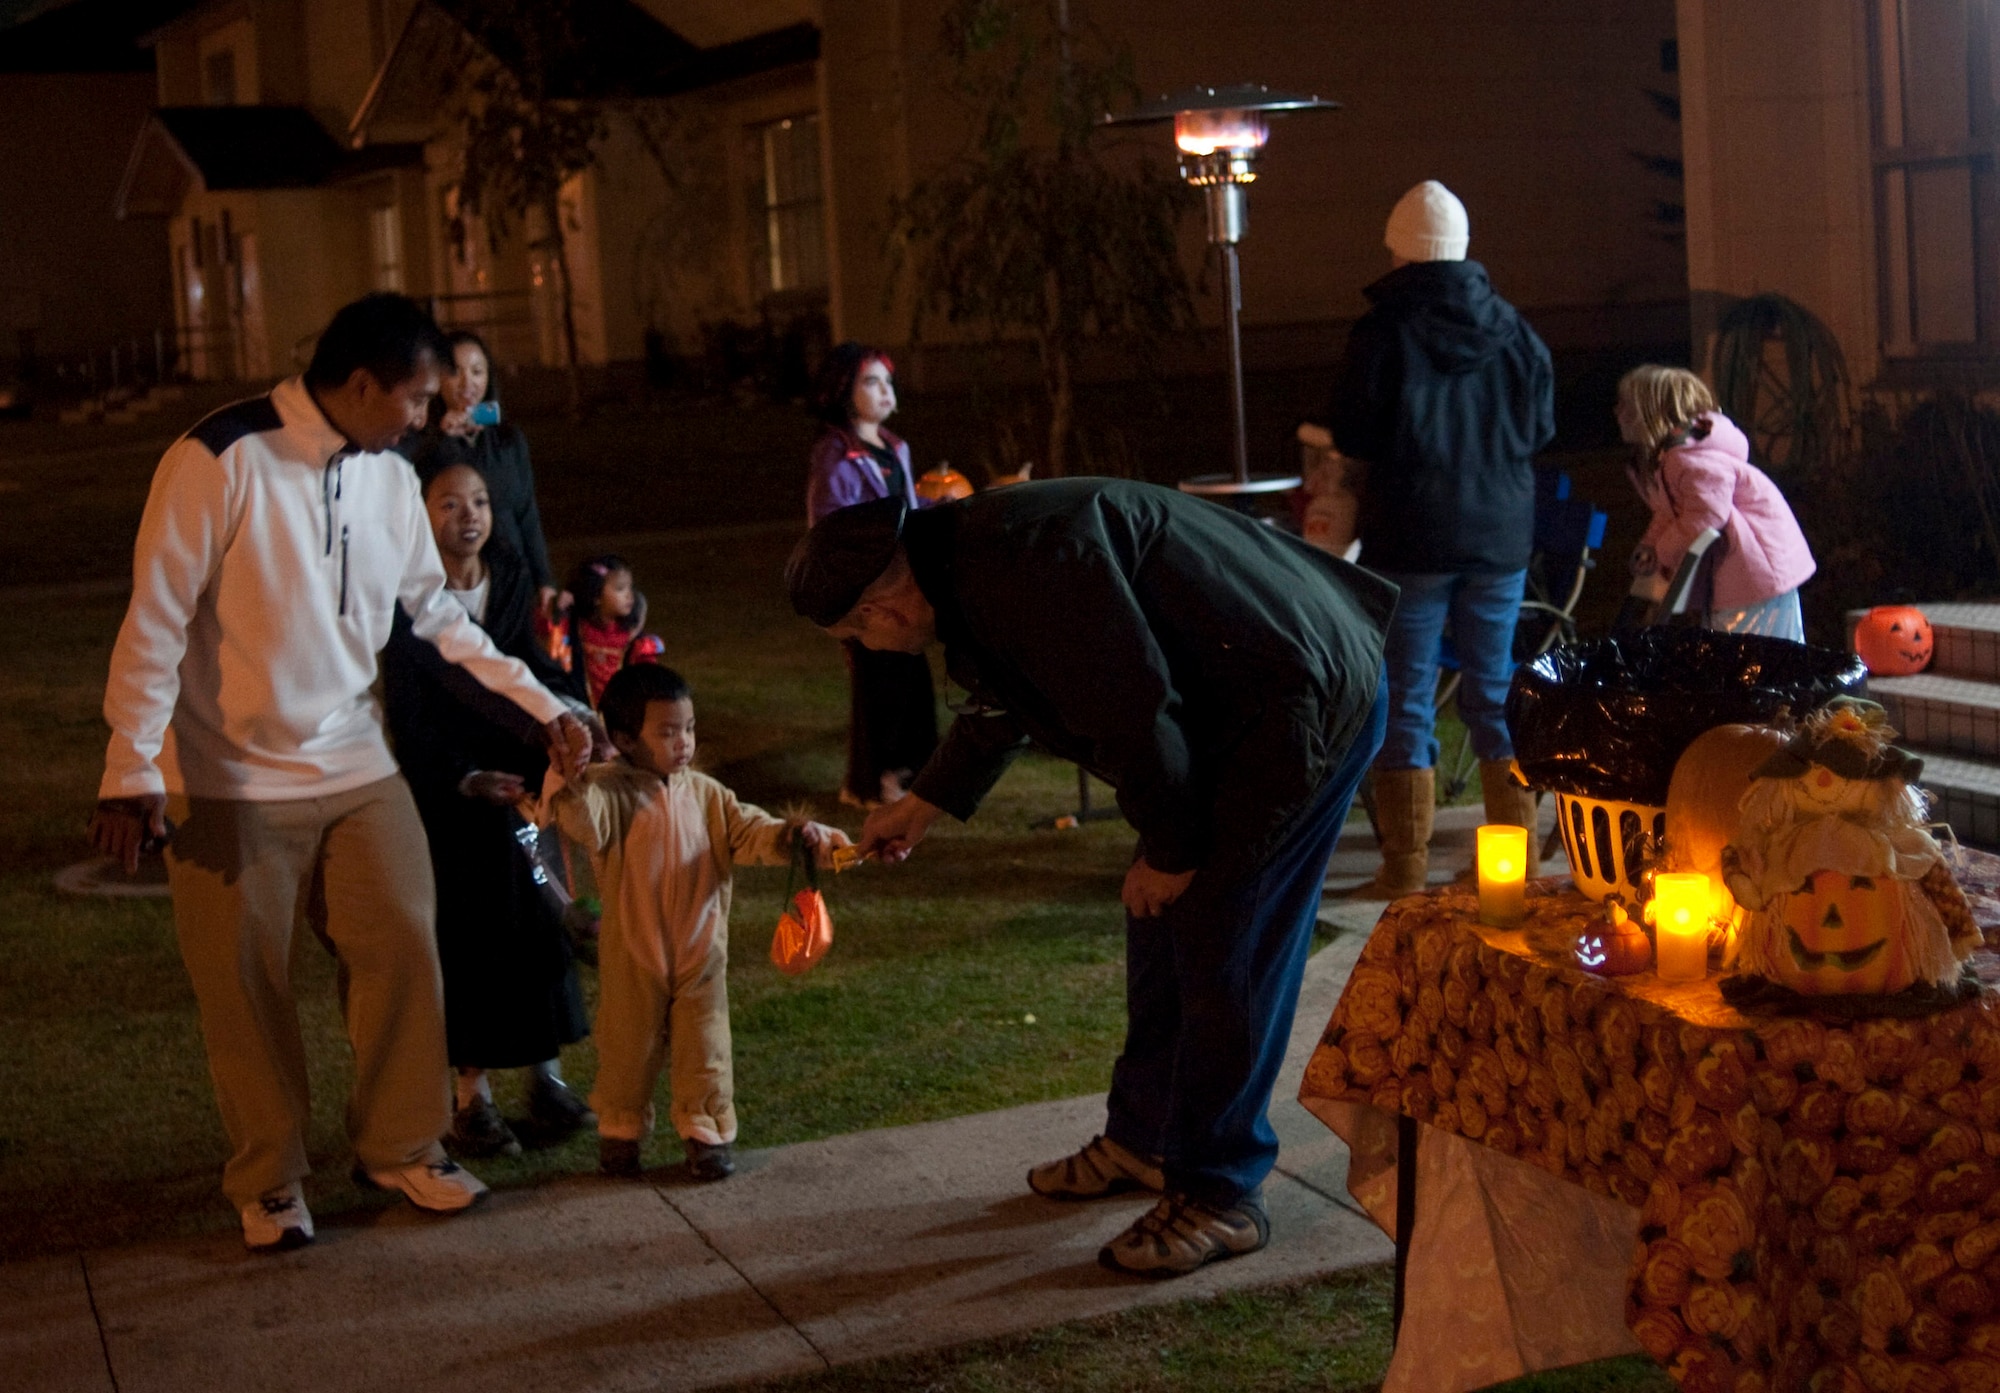 MISAWA AIR BASE, Japan -- Japanese and American children trick-or-treat throughout base housing on Halloween. An estimated 600 Japanese children joined the annual festivities. (U.S. Air Force photo/Staff Sgt. Samuel Morse)